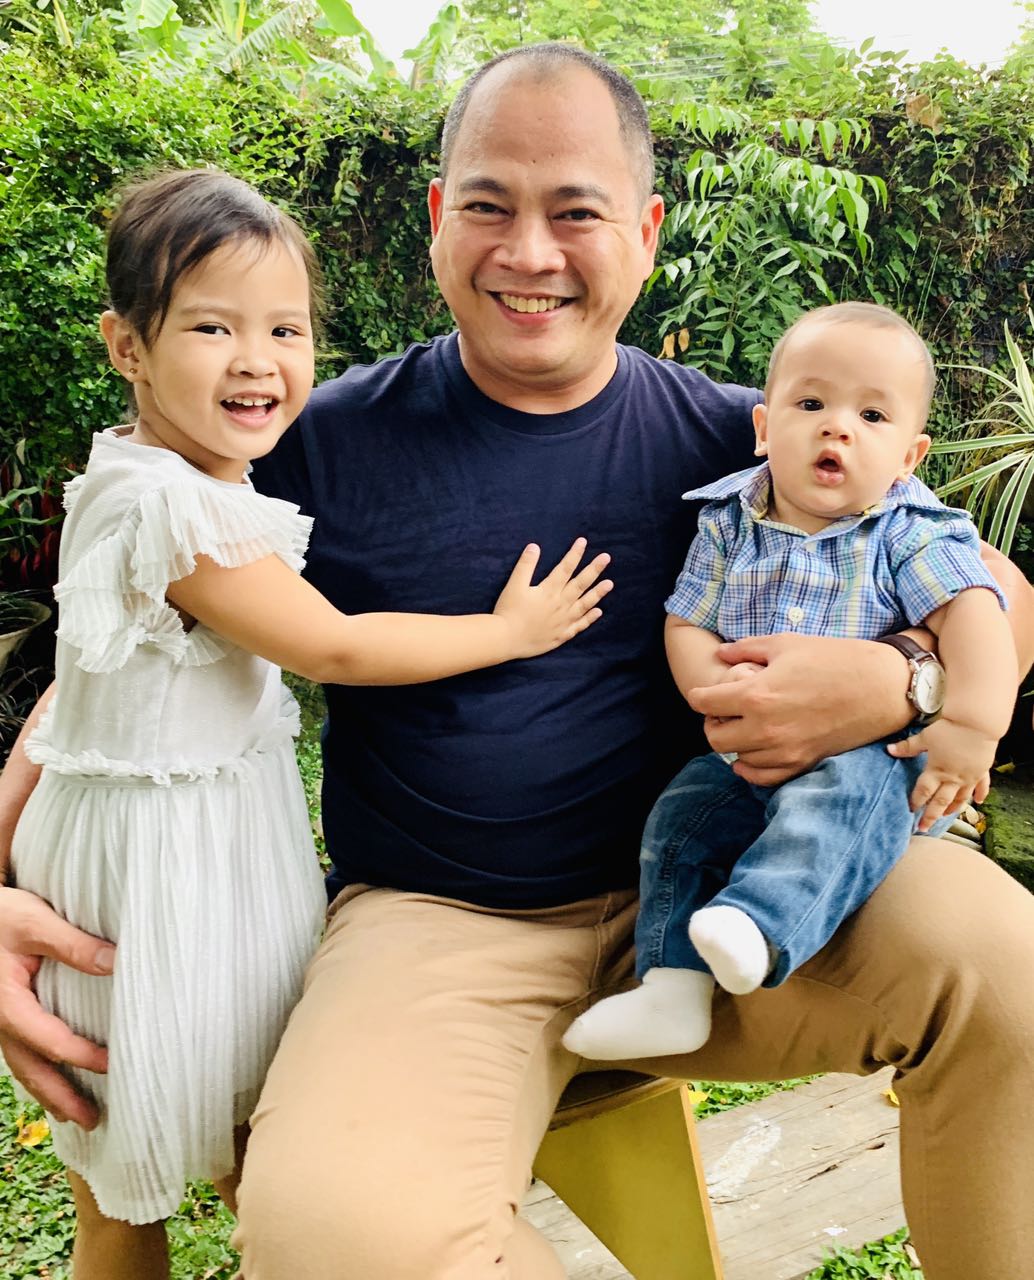 Chef dads: Kit Carpio and his children Brie and Pio